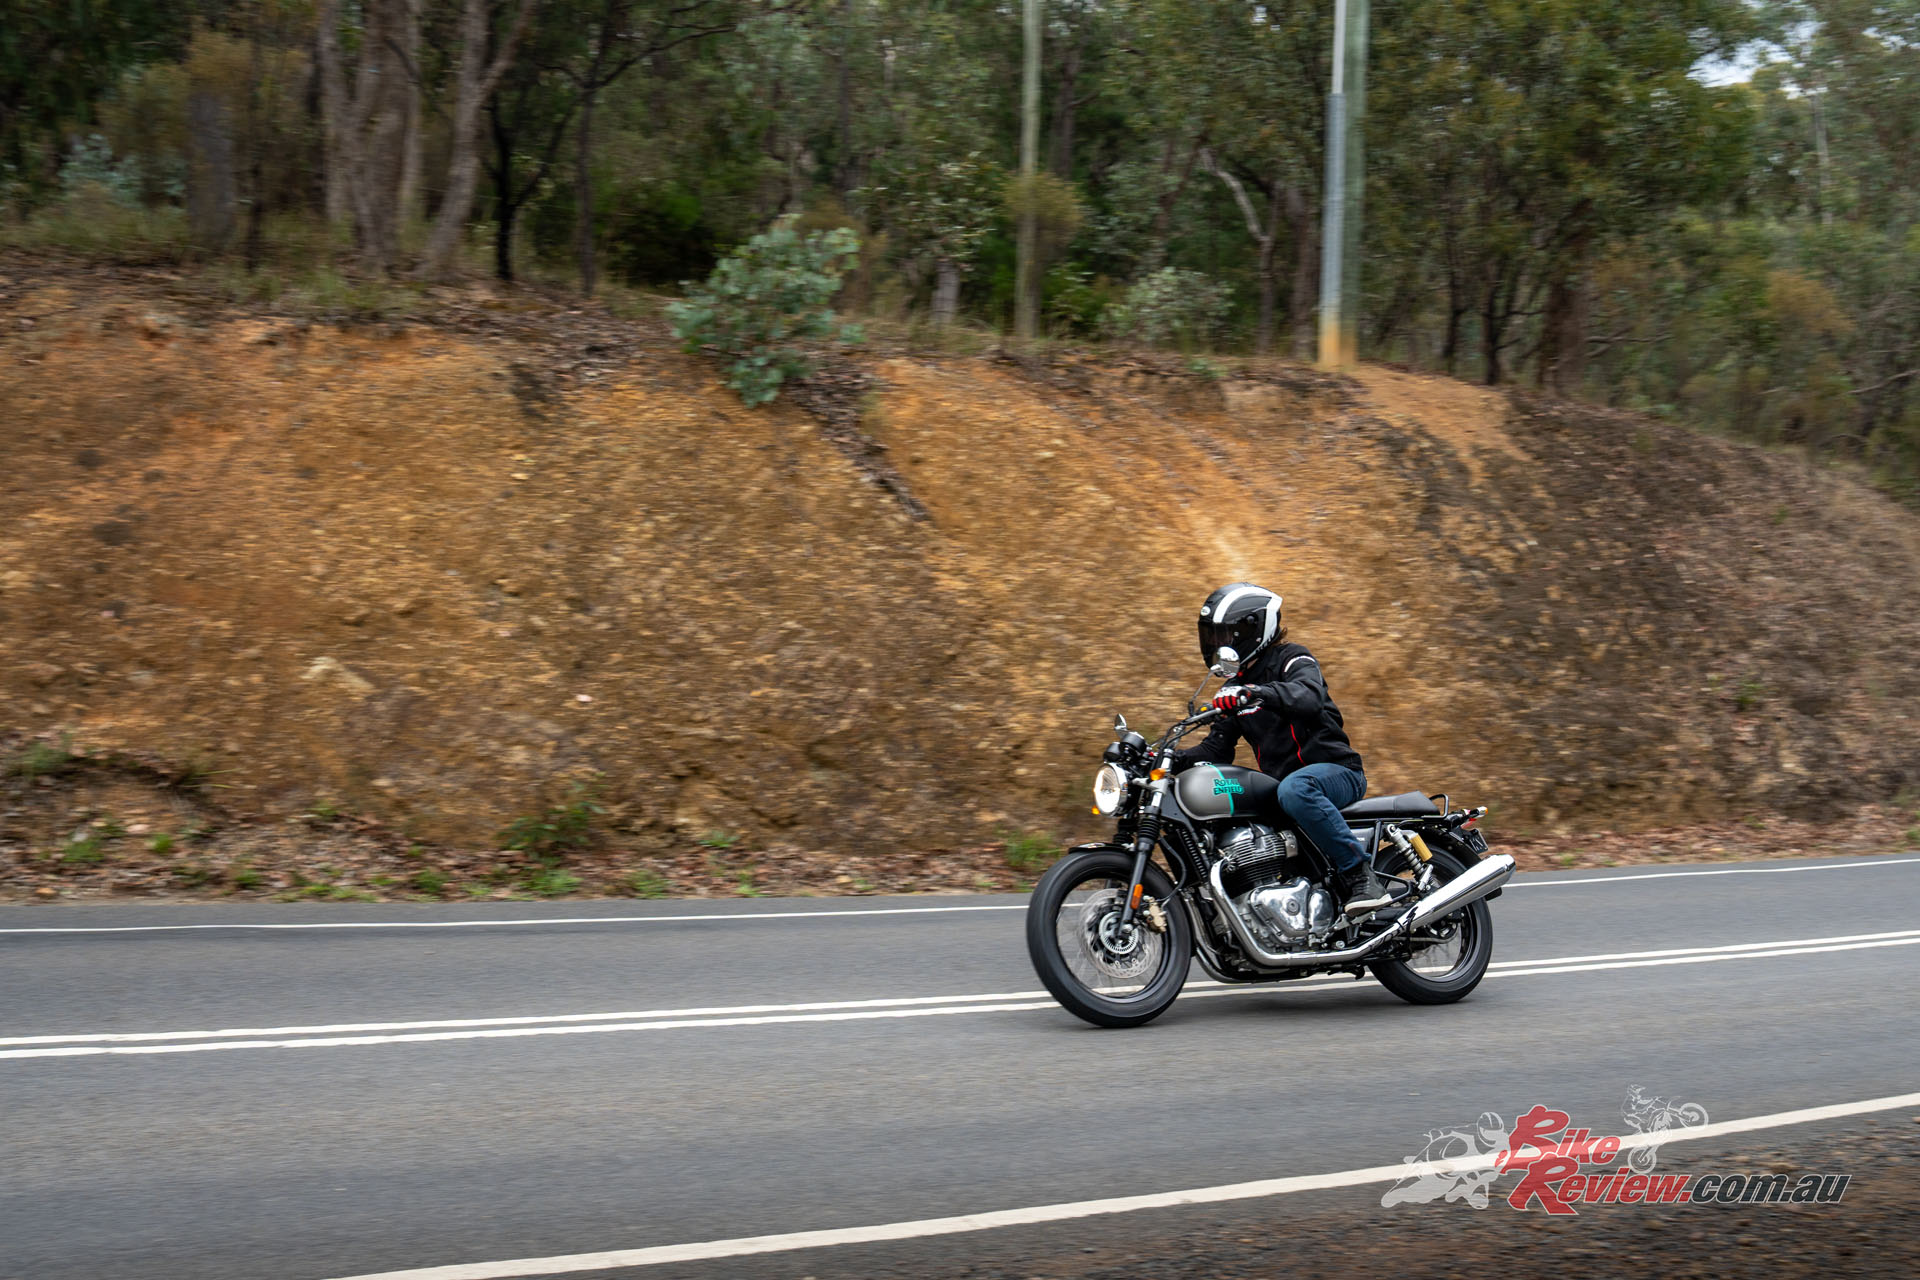 "The shift in rider triangle makes for an enjoyable cruiser, while a more upright seating position makes the Interceptor a little less taxing on the back and adds another level of slow-speed control."